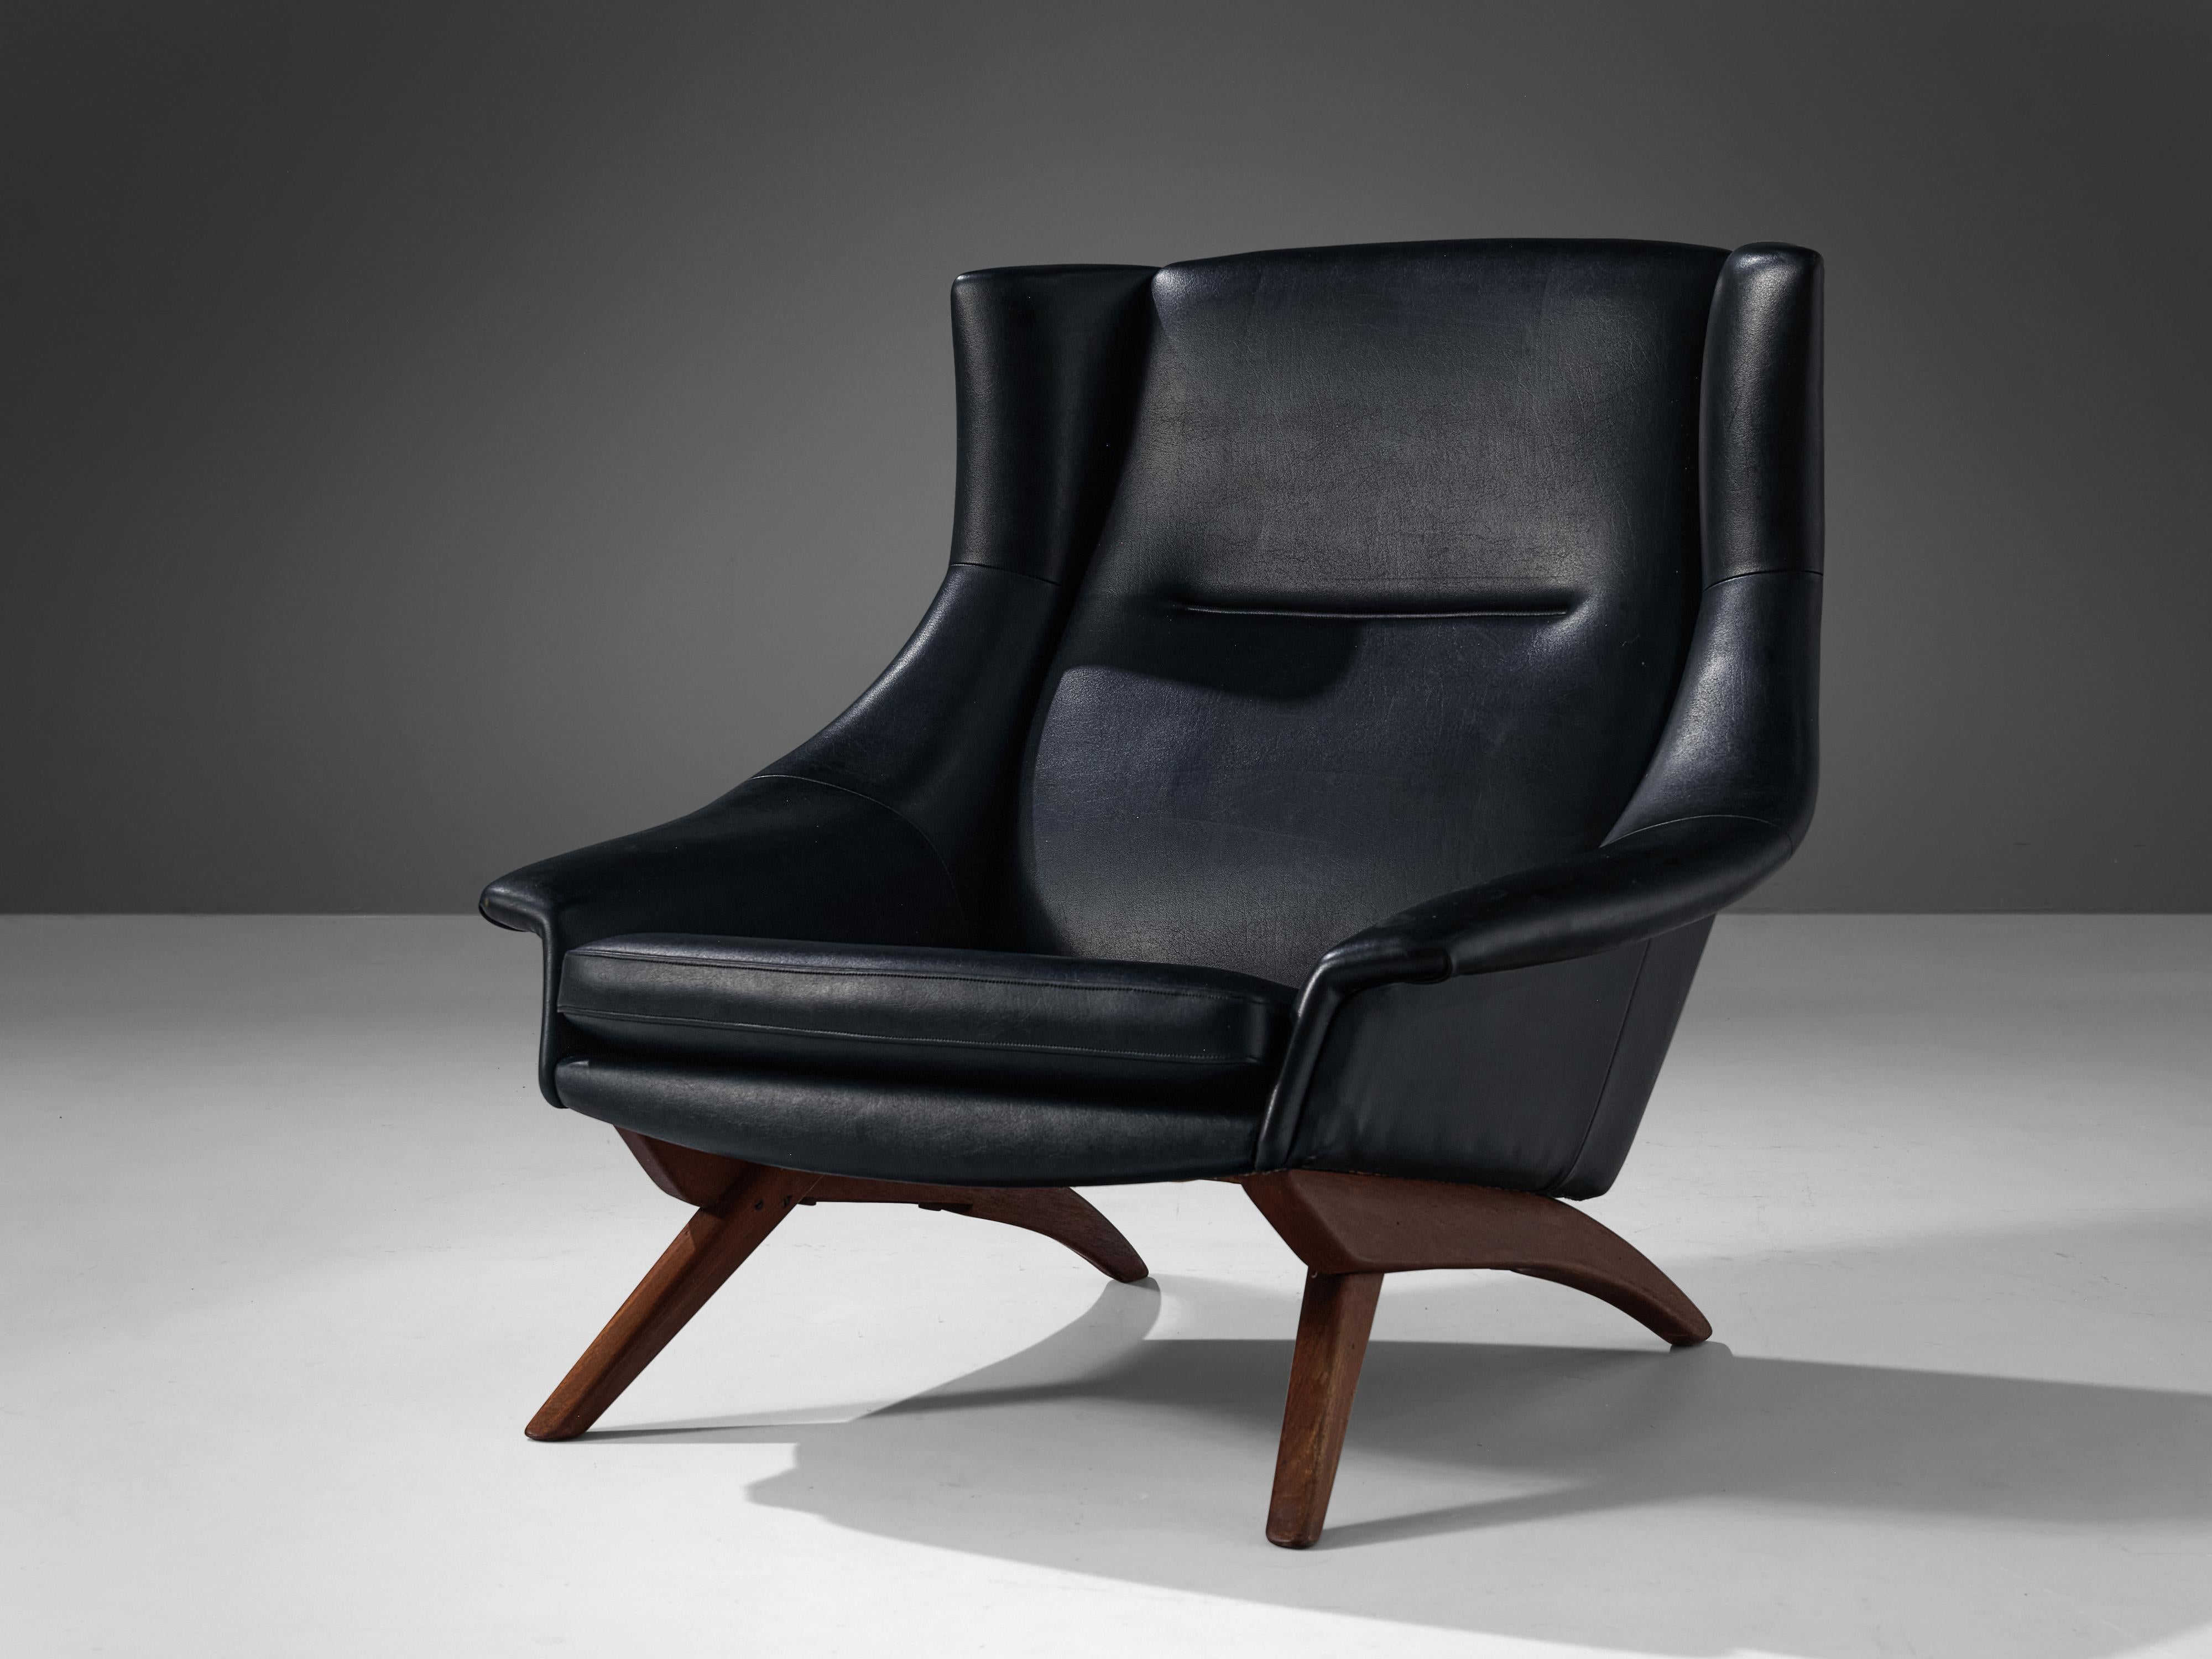 Lounge chair, teak, leather, Denmark, 1960s.

This lounge chair was designed in Denmark and shows great similarities with the designs of Illum Wikkelsø. This armchair is comfortable and shows playful details. The chair bends slightly backwards in